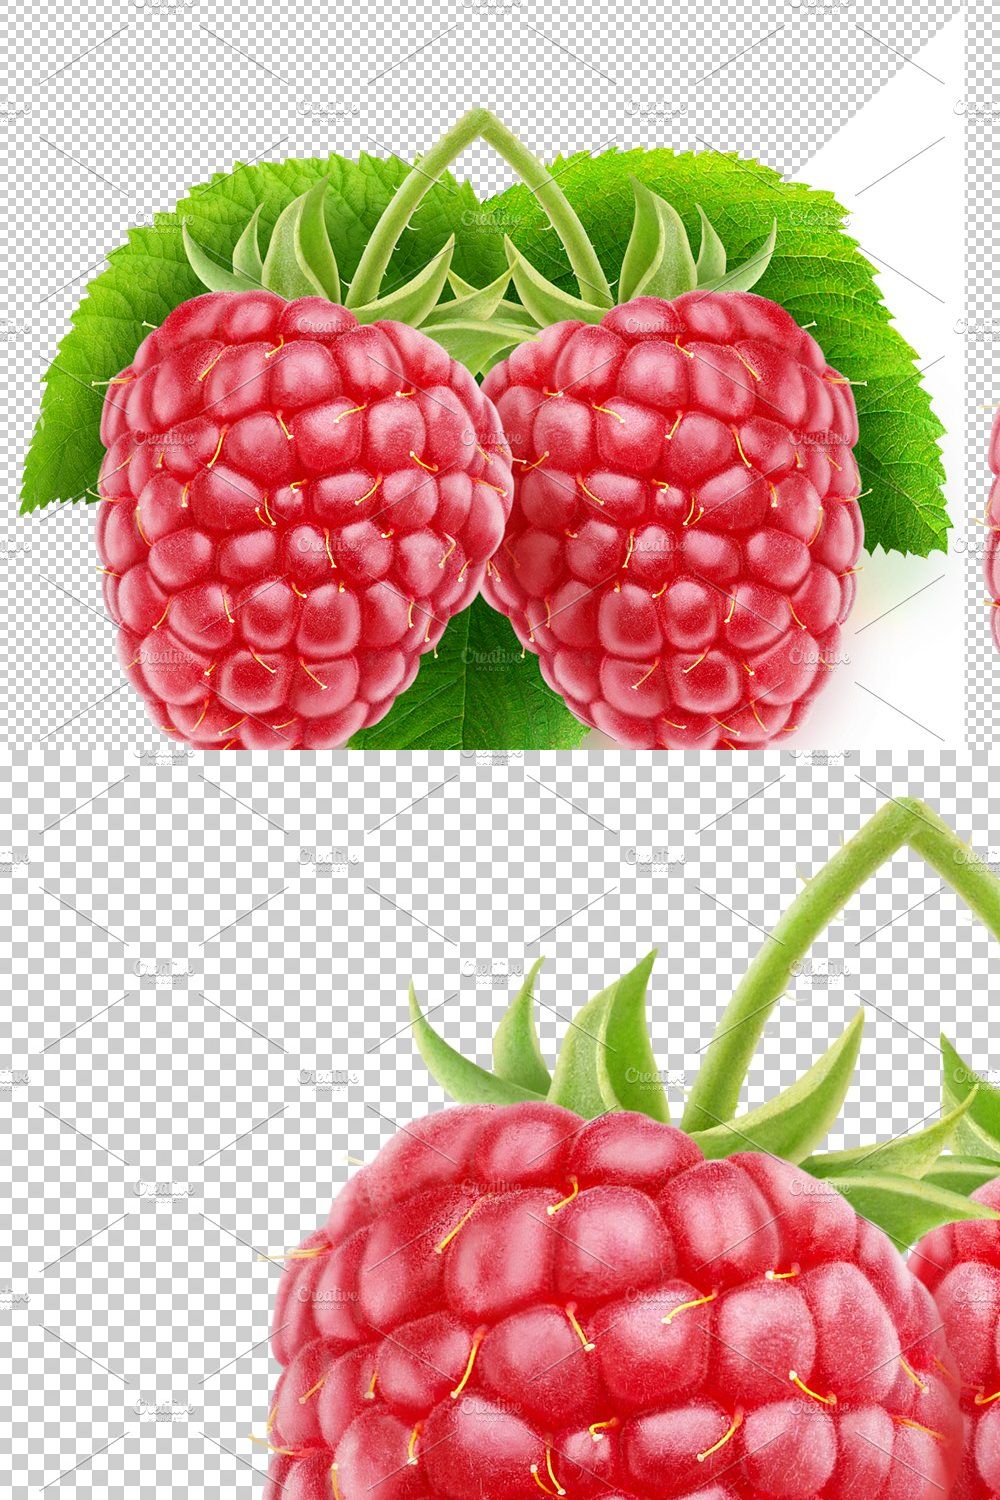 Pairs of raspberries pinterest preview image.